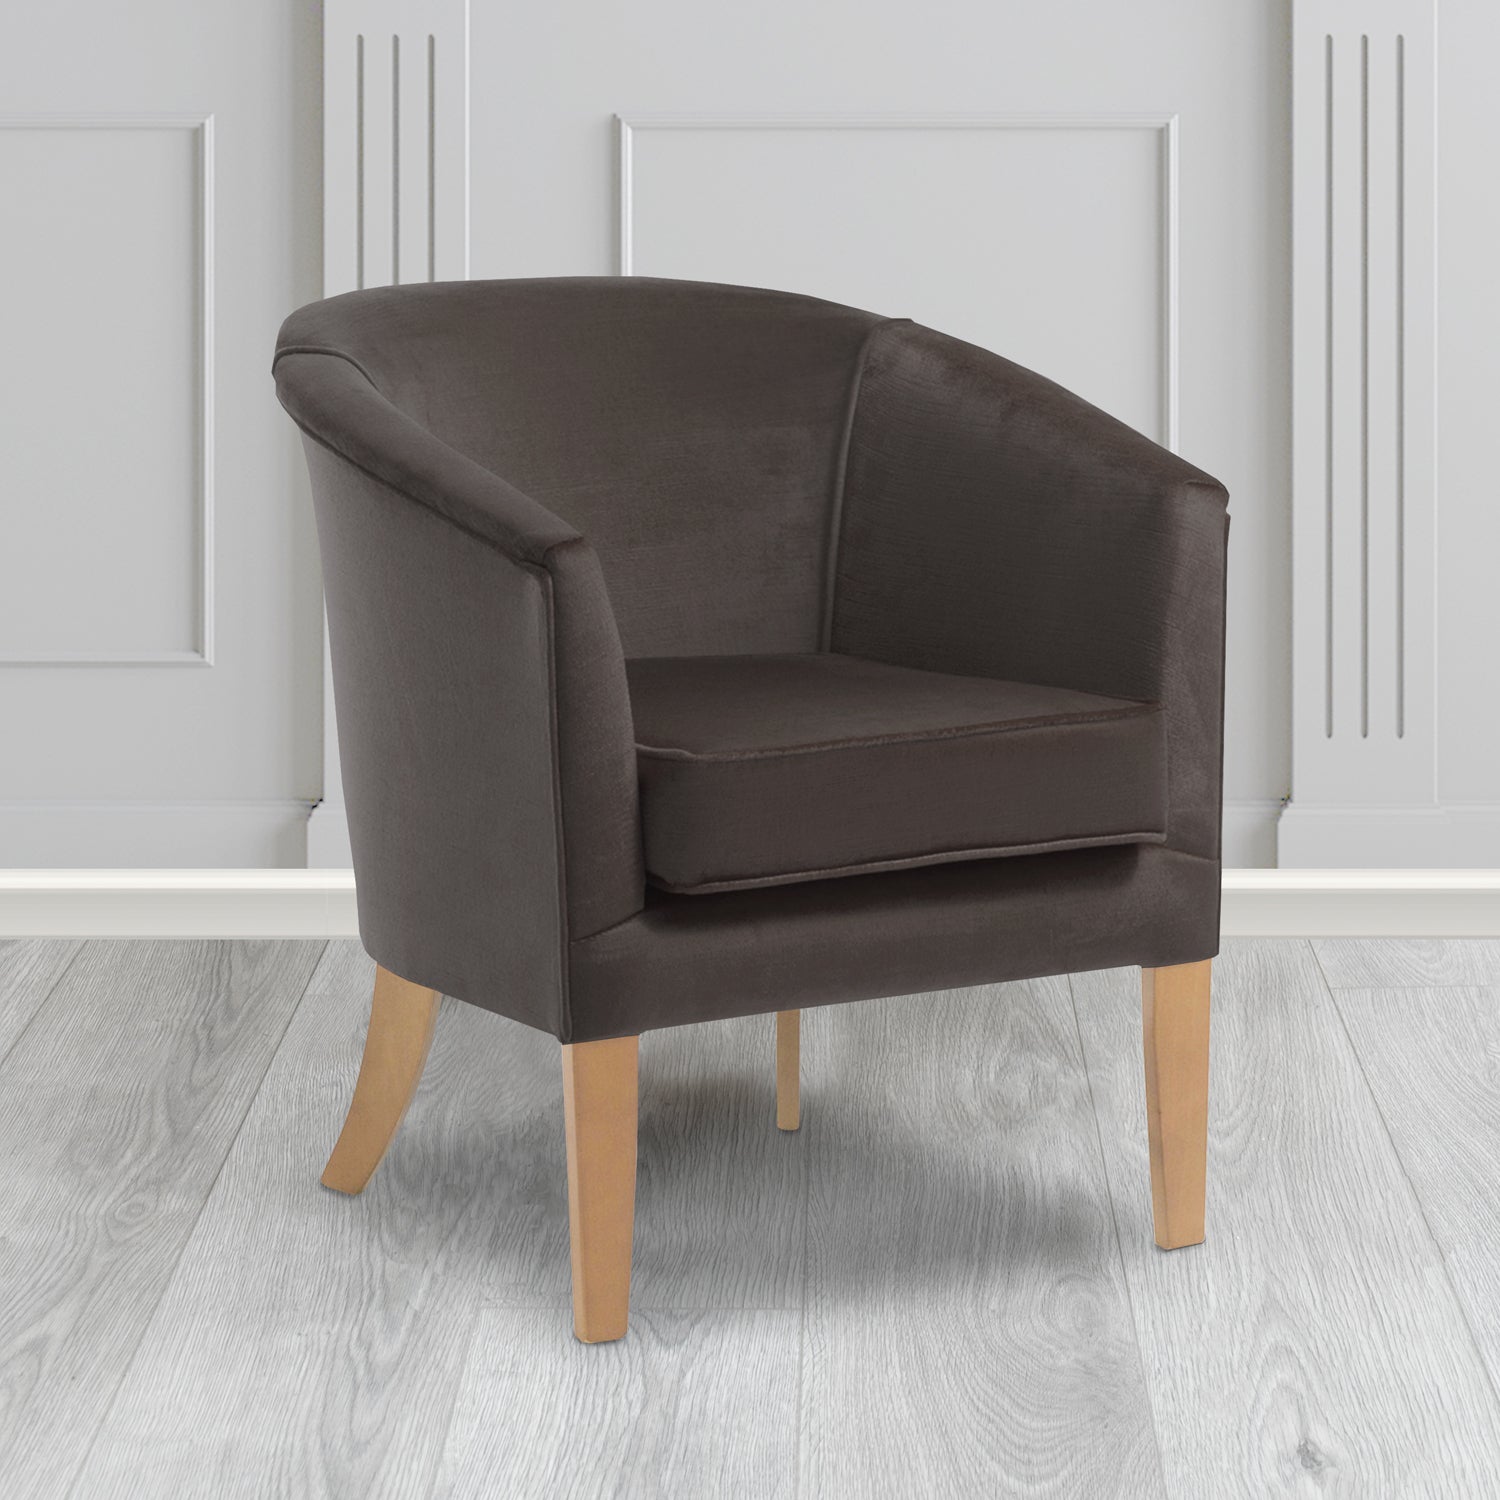 Jazz Tub Chair in Noble 903 Charcoal Crib 5 Velvet Fabric - Water Resistant - The Tub Chair Shop